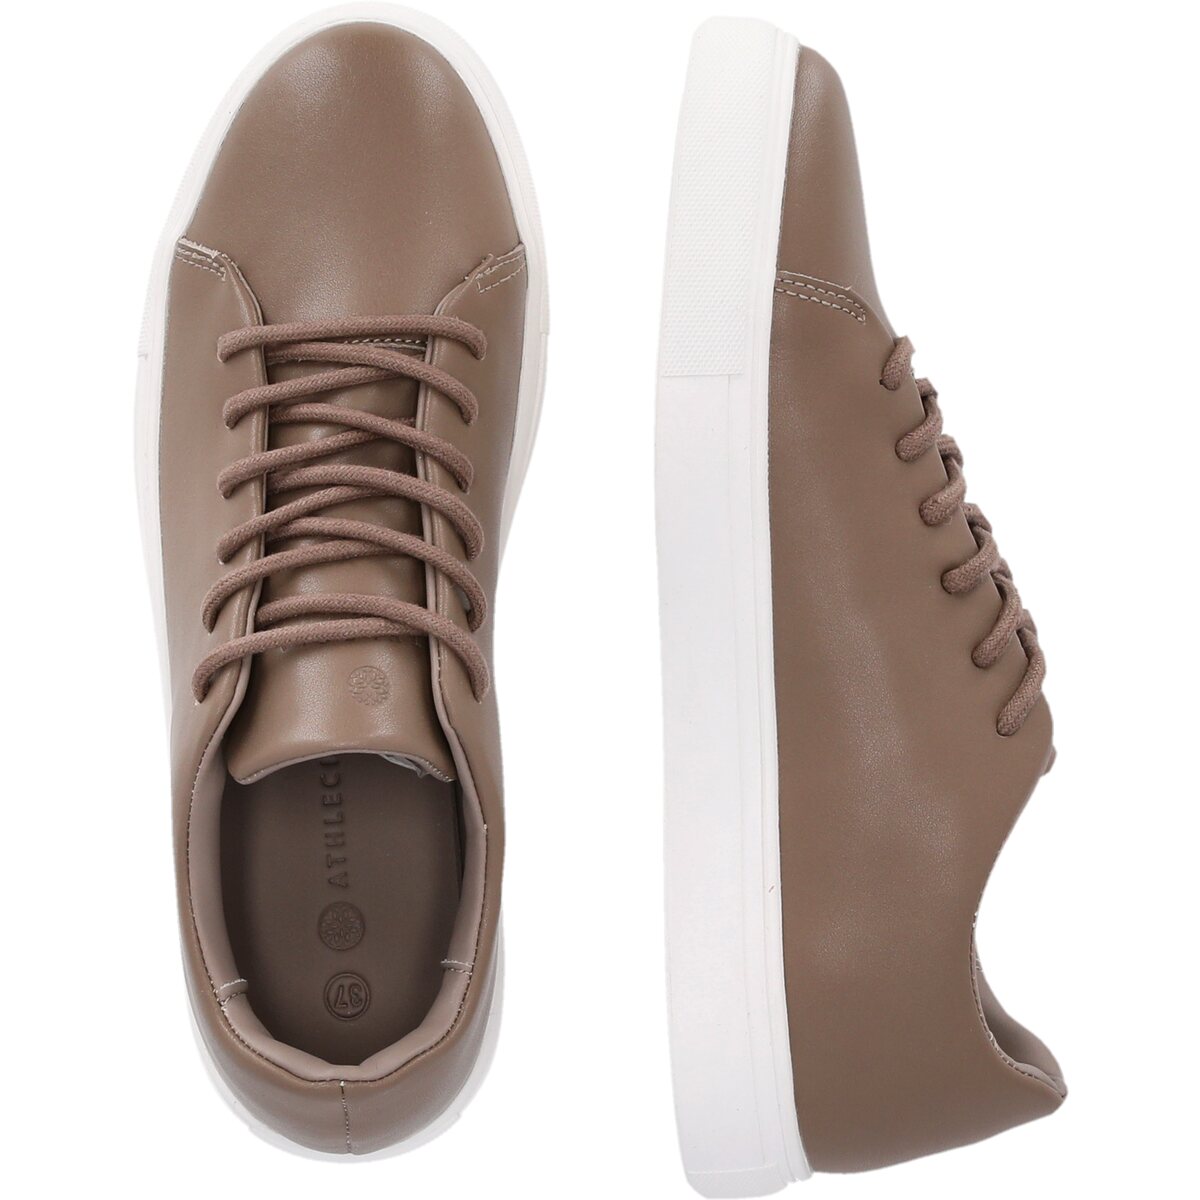 Athlecia Christinia Classic Sneakers - Taupe 2 Shaws Department Stores